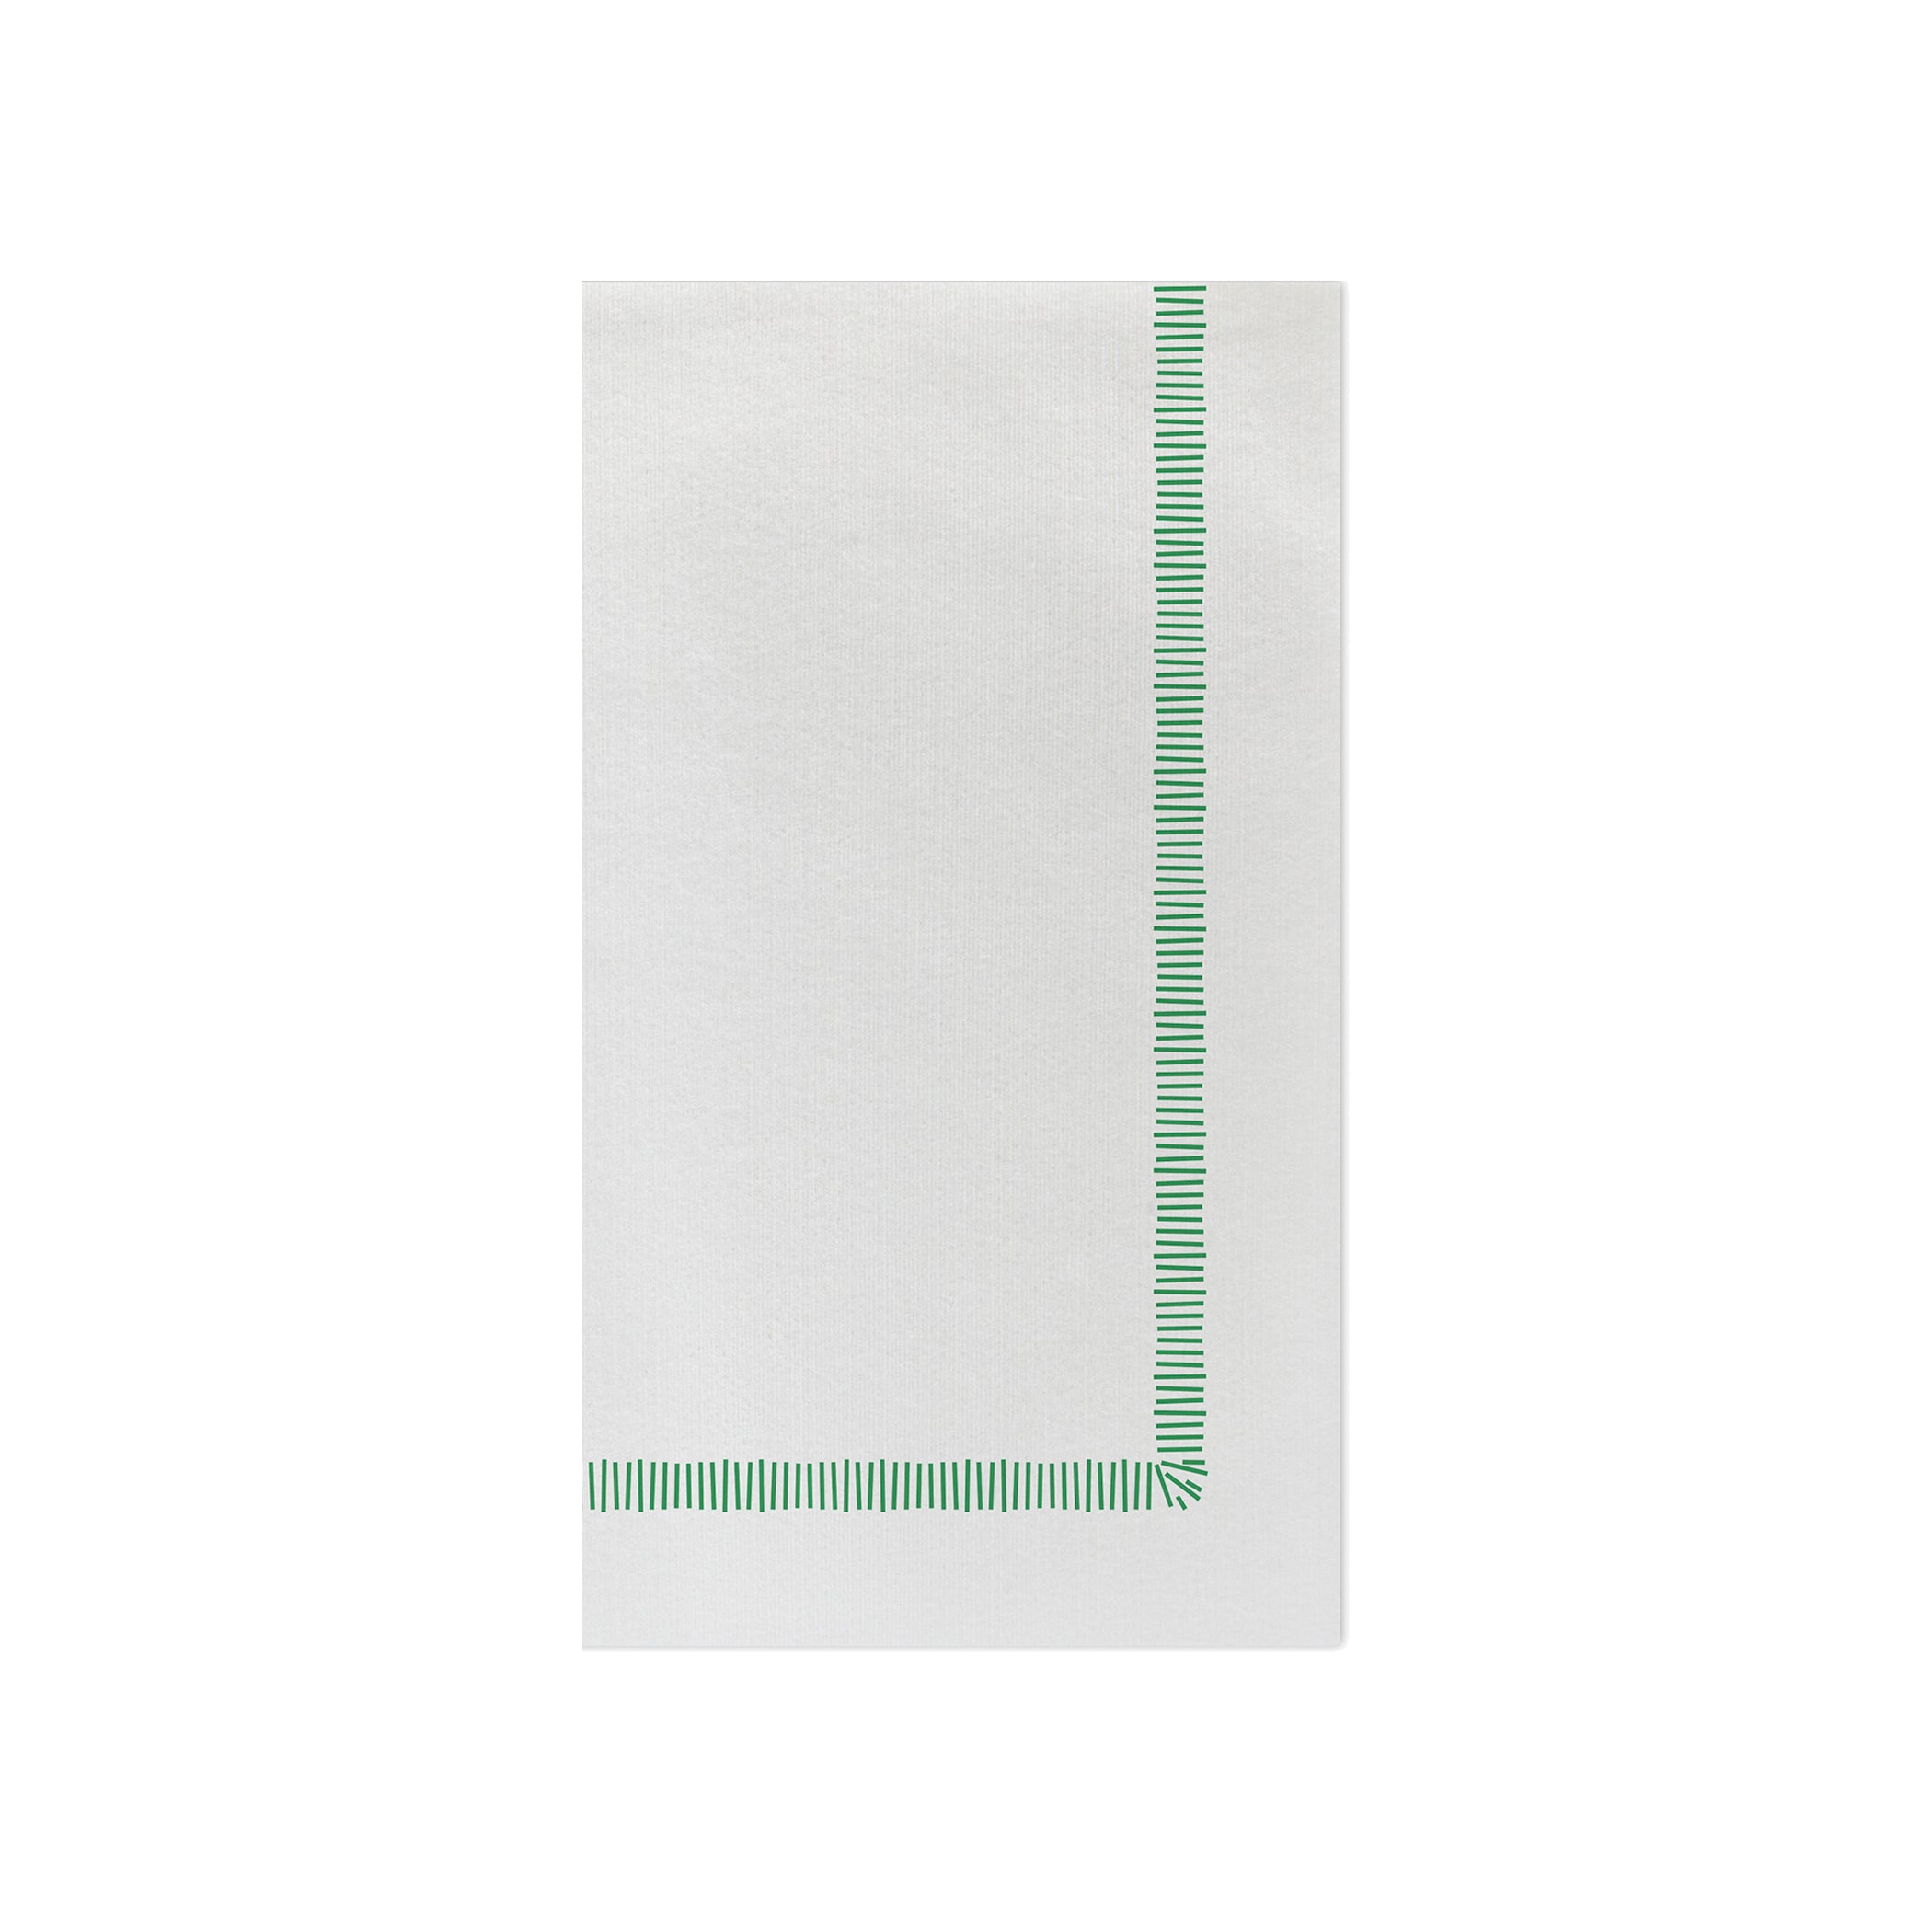 Papersoft Napkins Fringe Green Guest Towels - Pack of 20